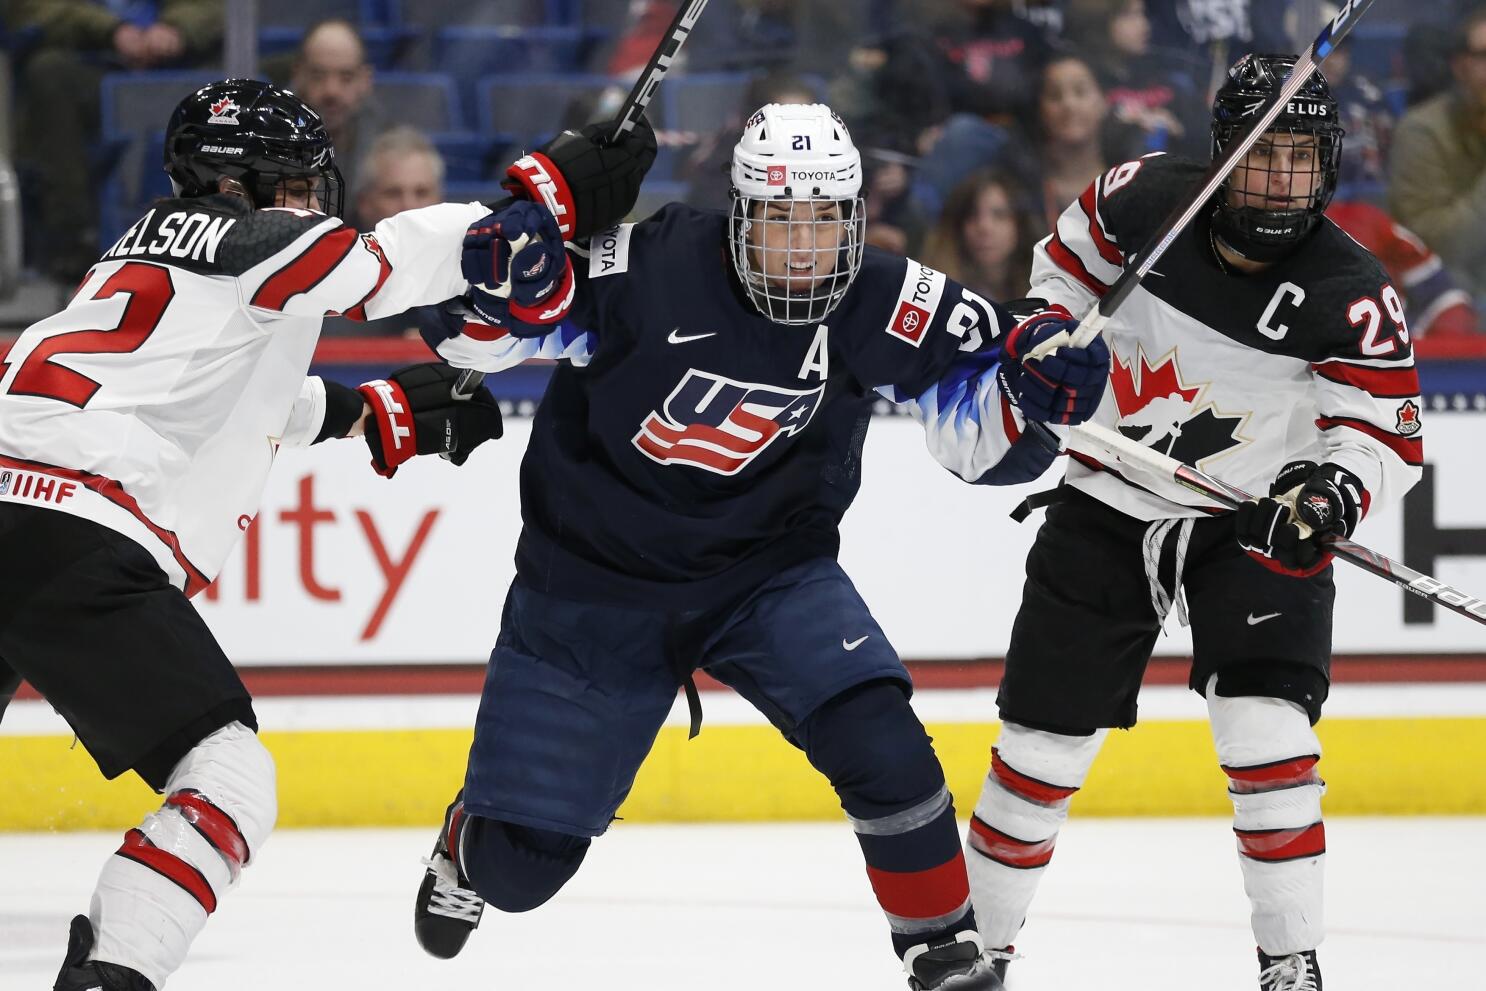 US Women's Olympic Hockey Team Once Again Led by Hilary Knight